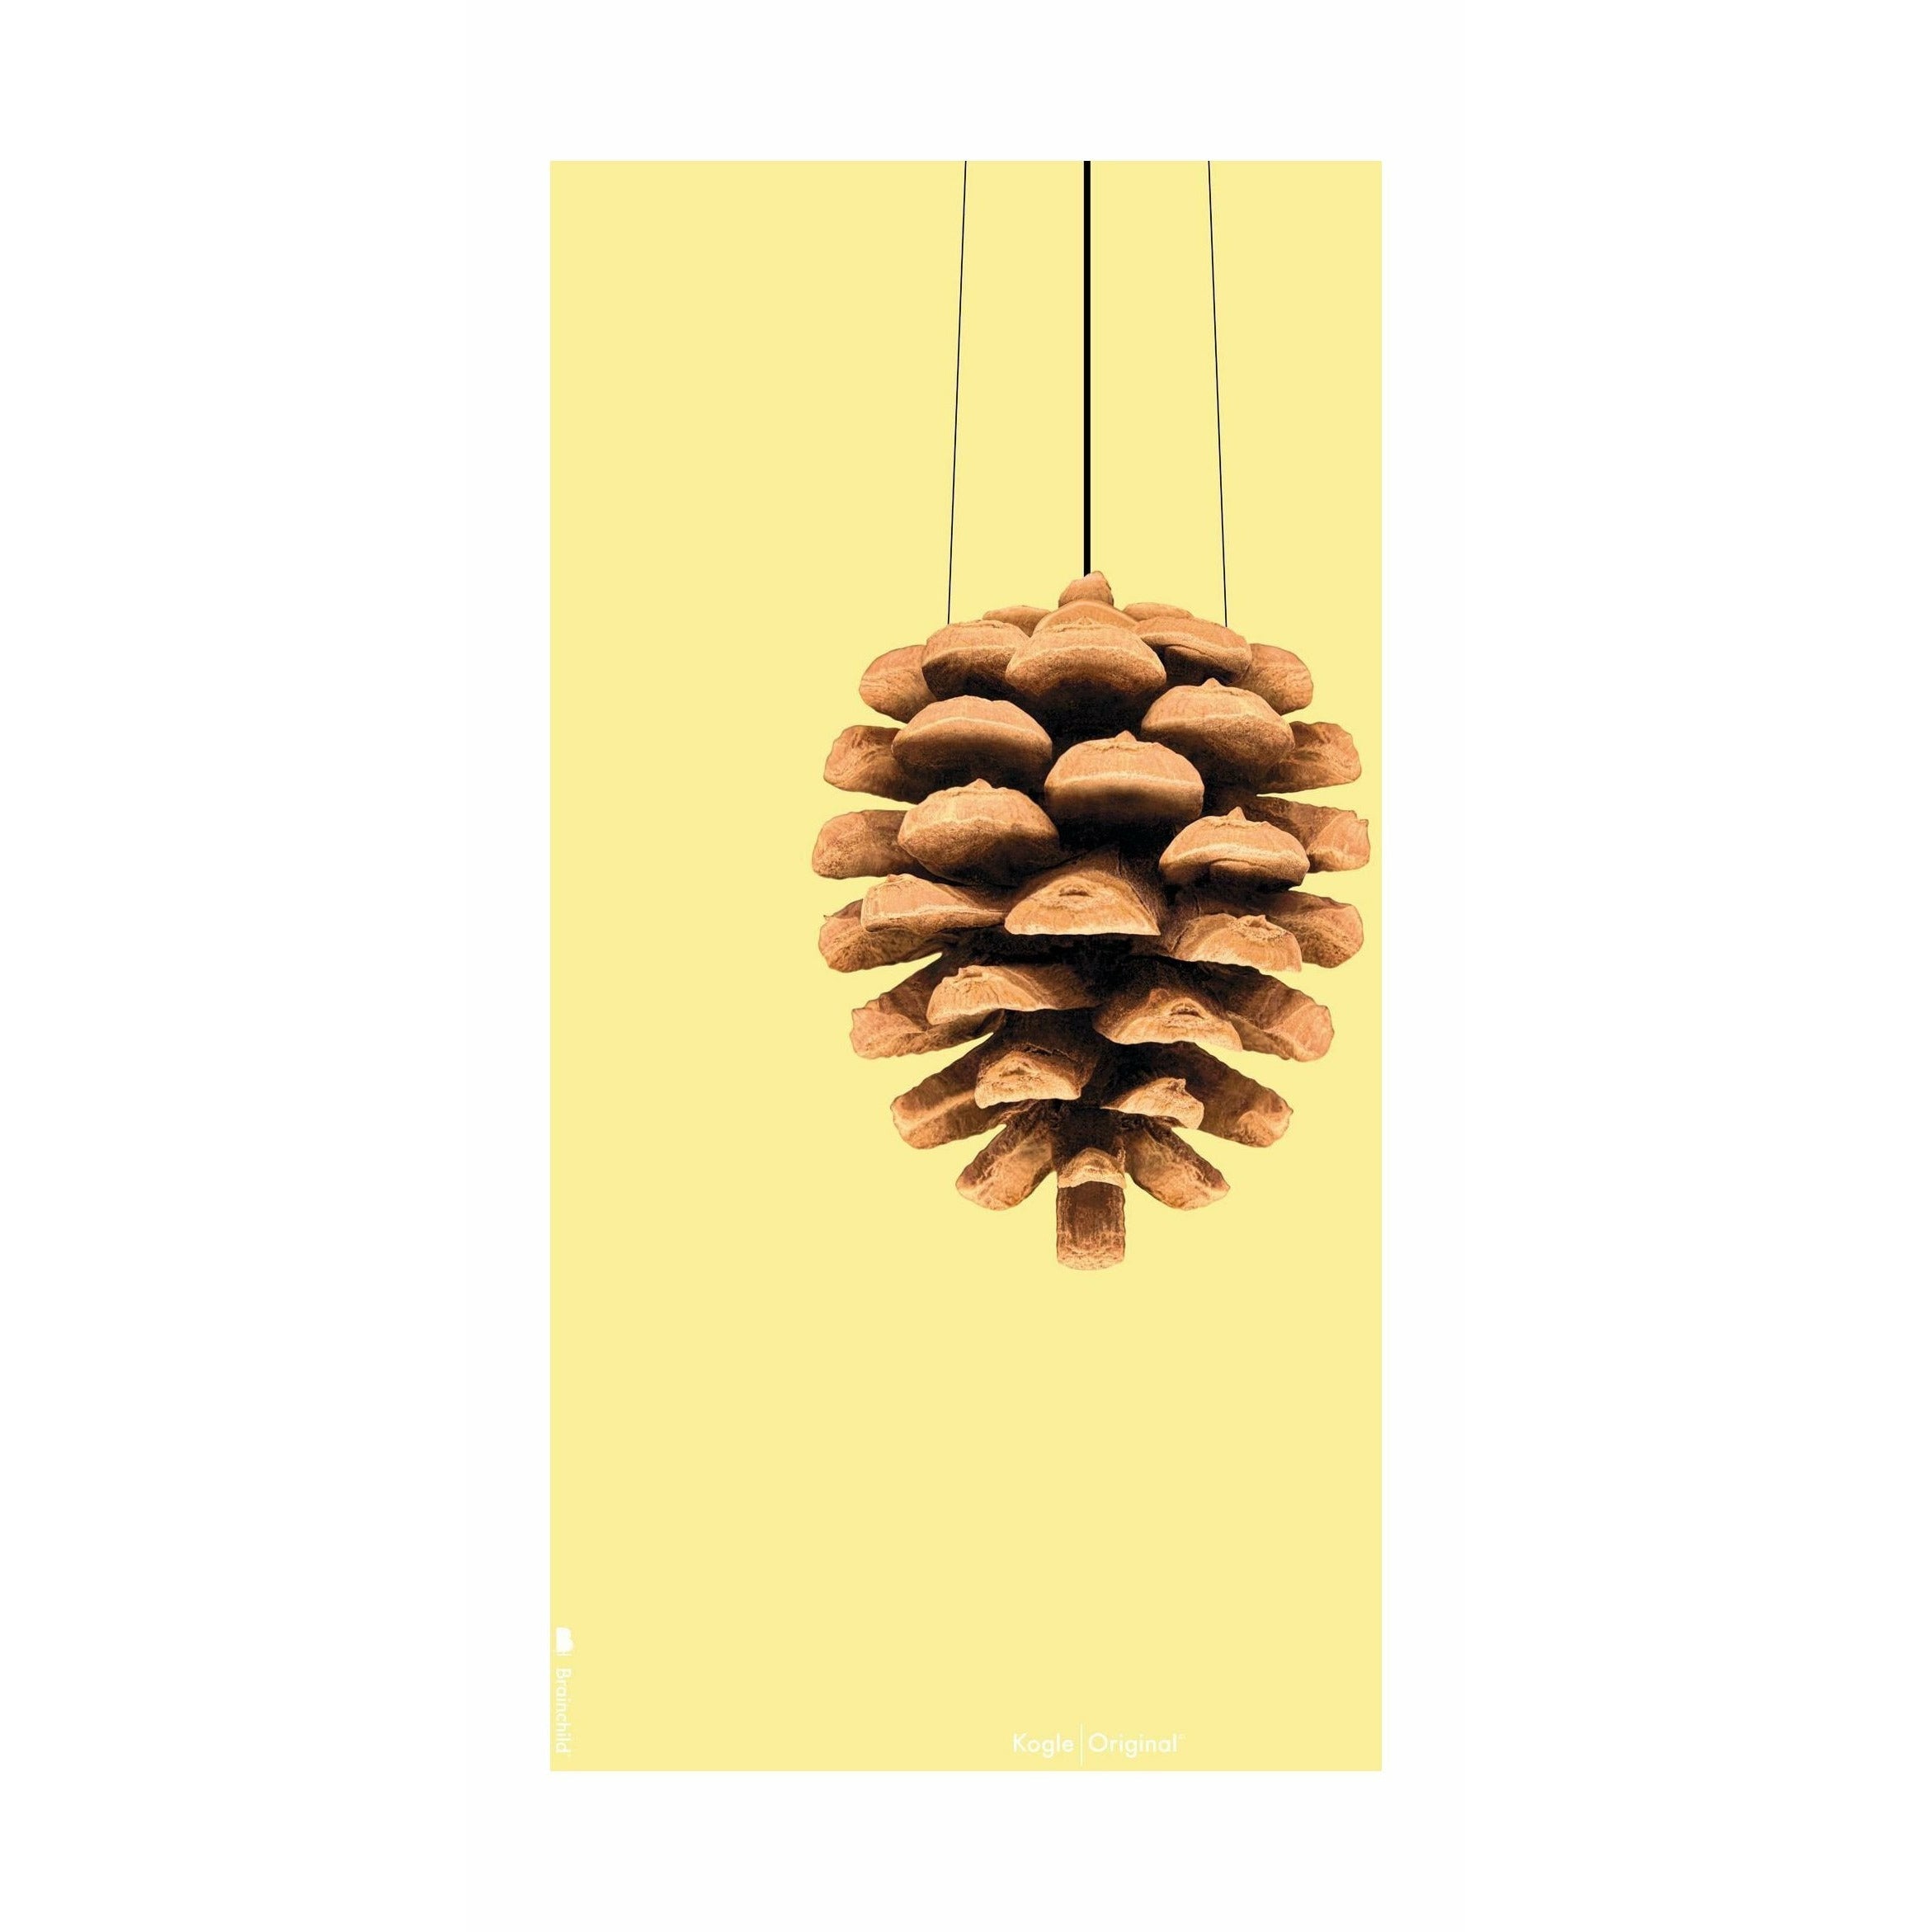 Brainchild Pine Cone Classic Poster Without Frame 70 X100 Cm, Yellow Background